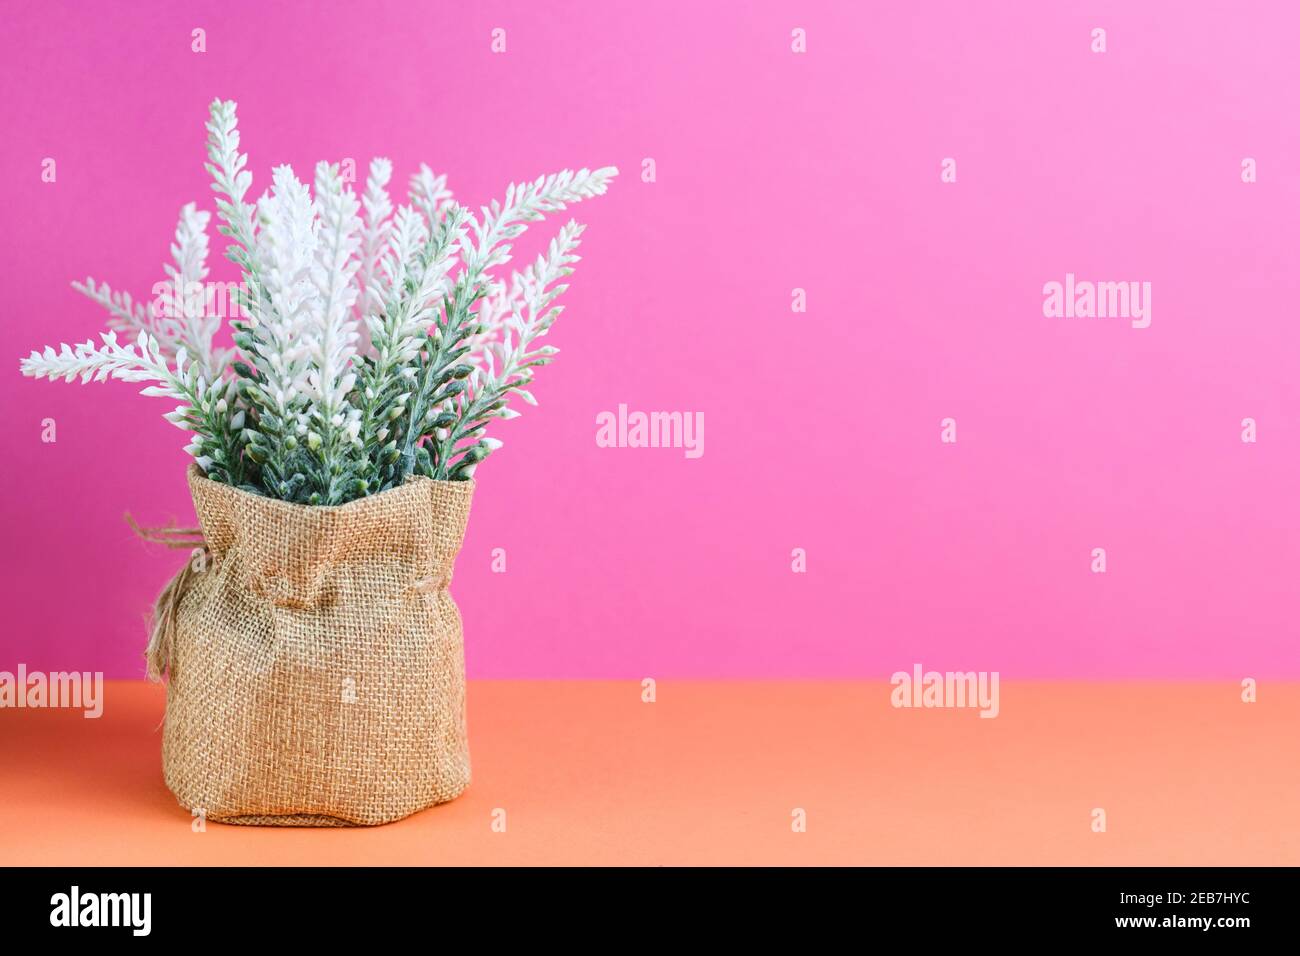 Home plant in a canvas basket on a colored background. Green plant on a pink-orange background. Stock Photo